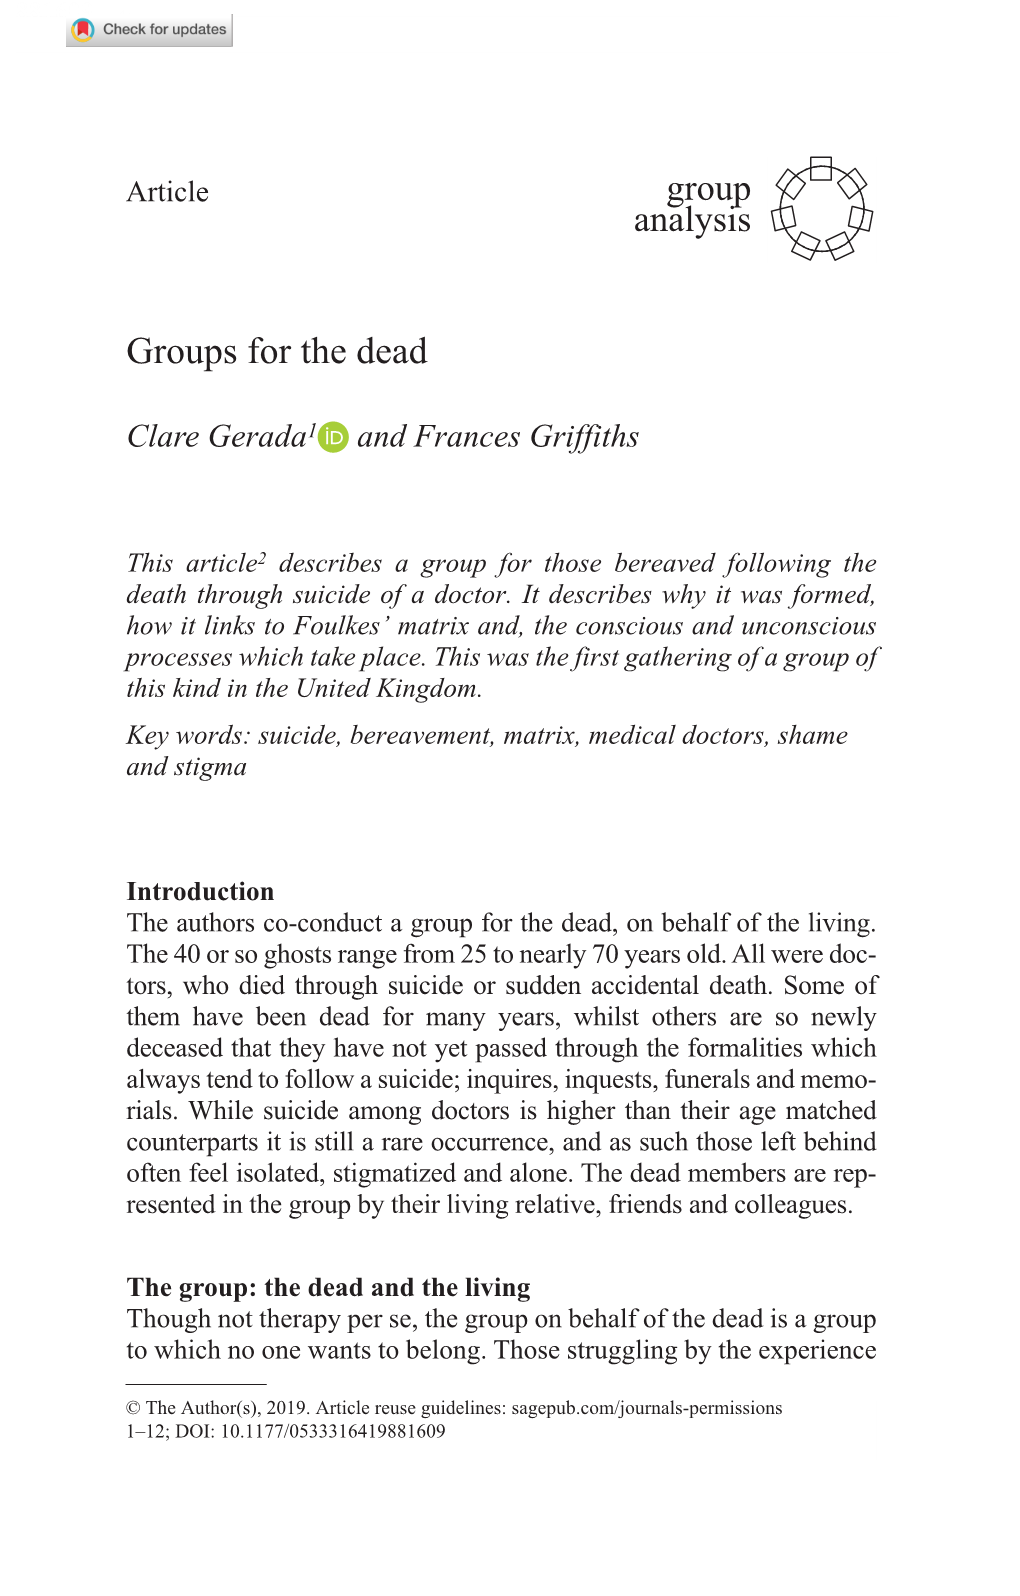 Groups for the Dead Research-Article8816092019